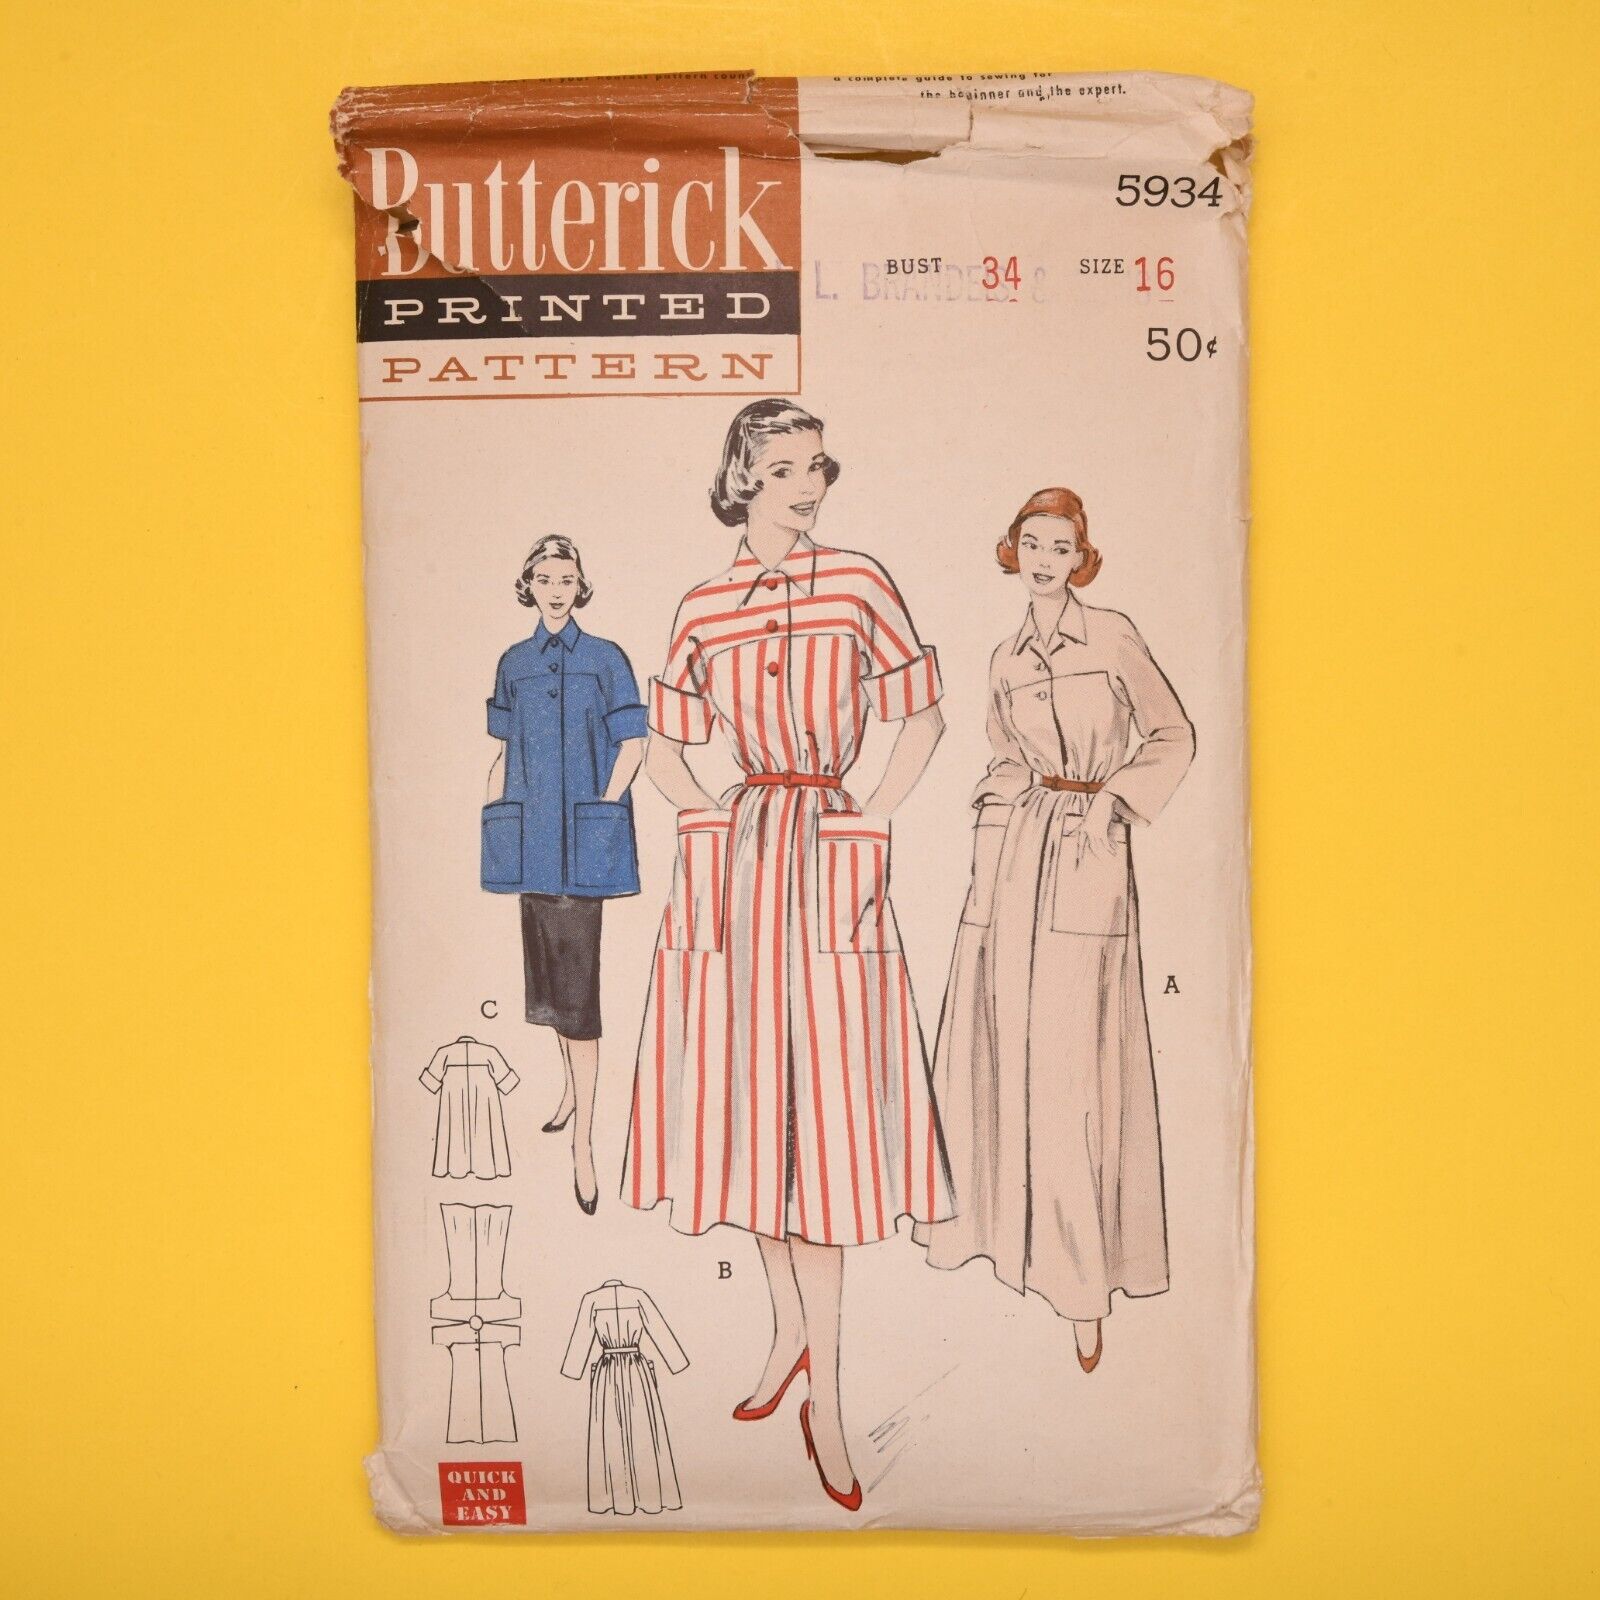 Vintage 1950s Butterick Robe or Smock Sewing Pattern - 5934 - Bust 34 - Complete